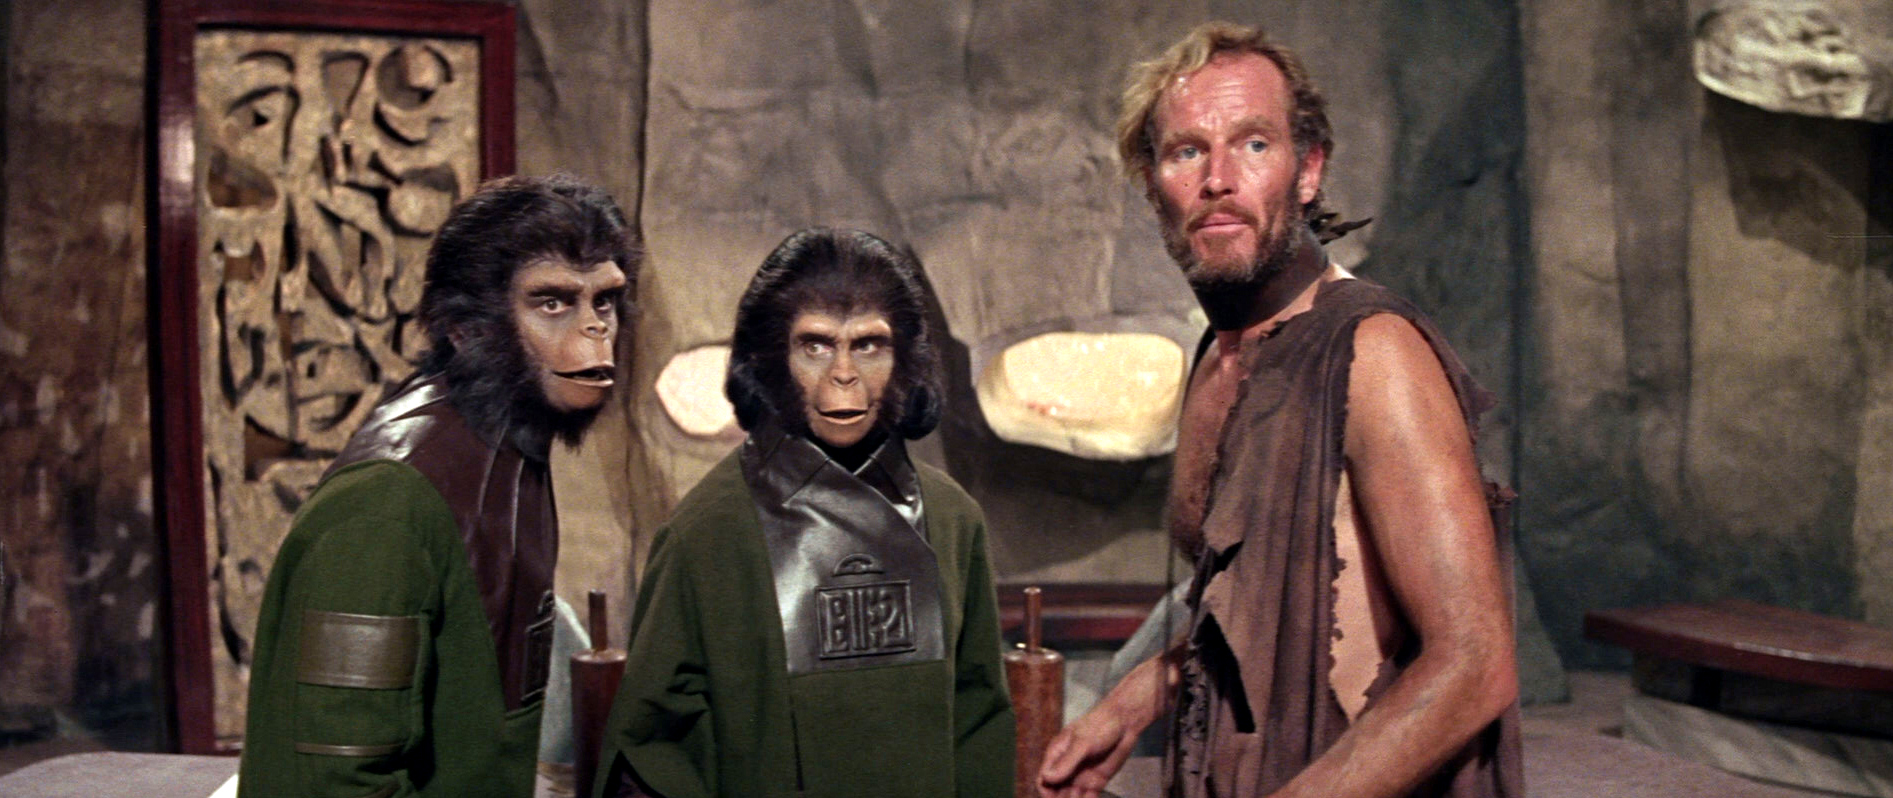 large-planet-of-the-apes-blu-ray1.jpg